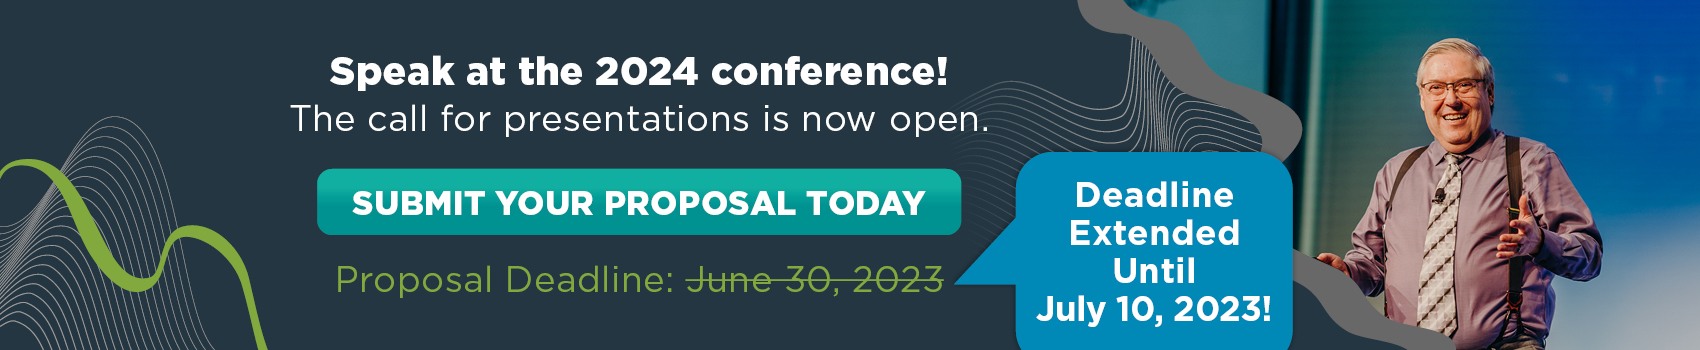 Speak at the 2024 conference! The call for presentations is now open. SUBMIT YOUR PROPOSAL TODAY Proposal Deadline: June 30, 2023